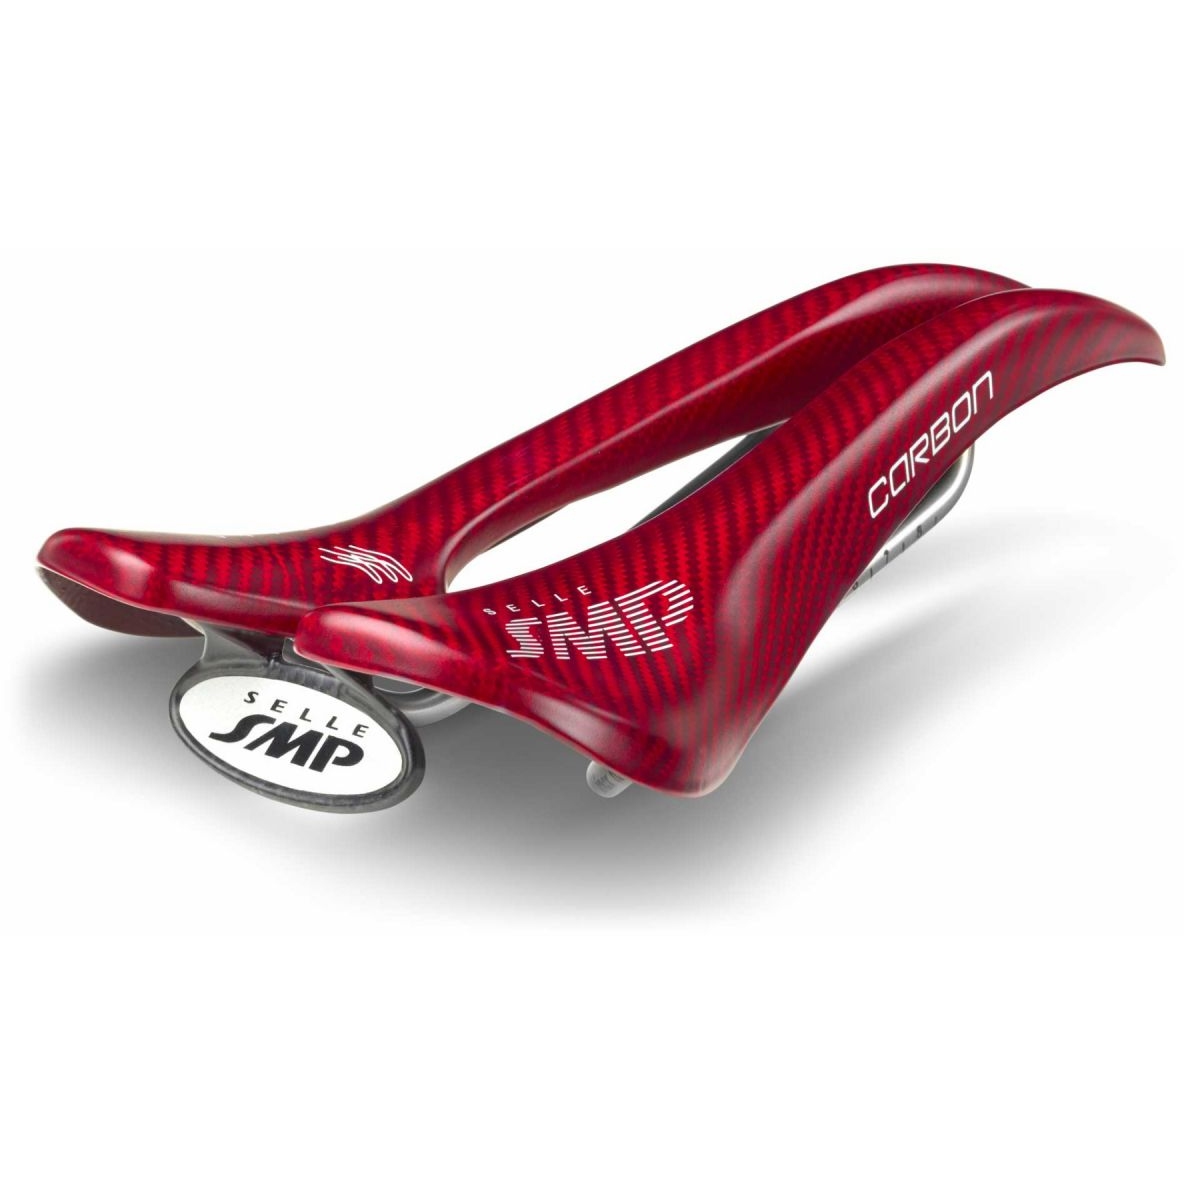 Productfoto van Selle SMP Carbon Saddle - red